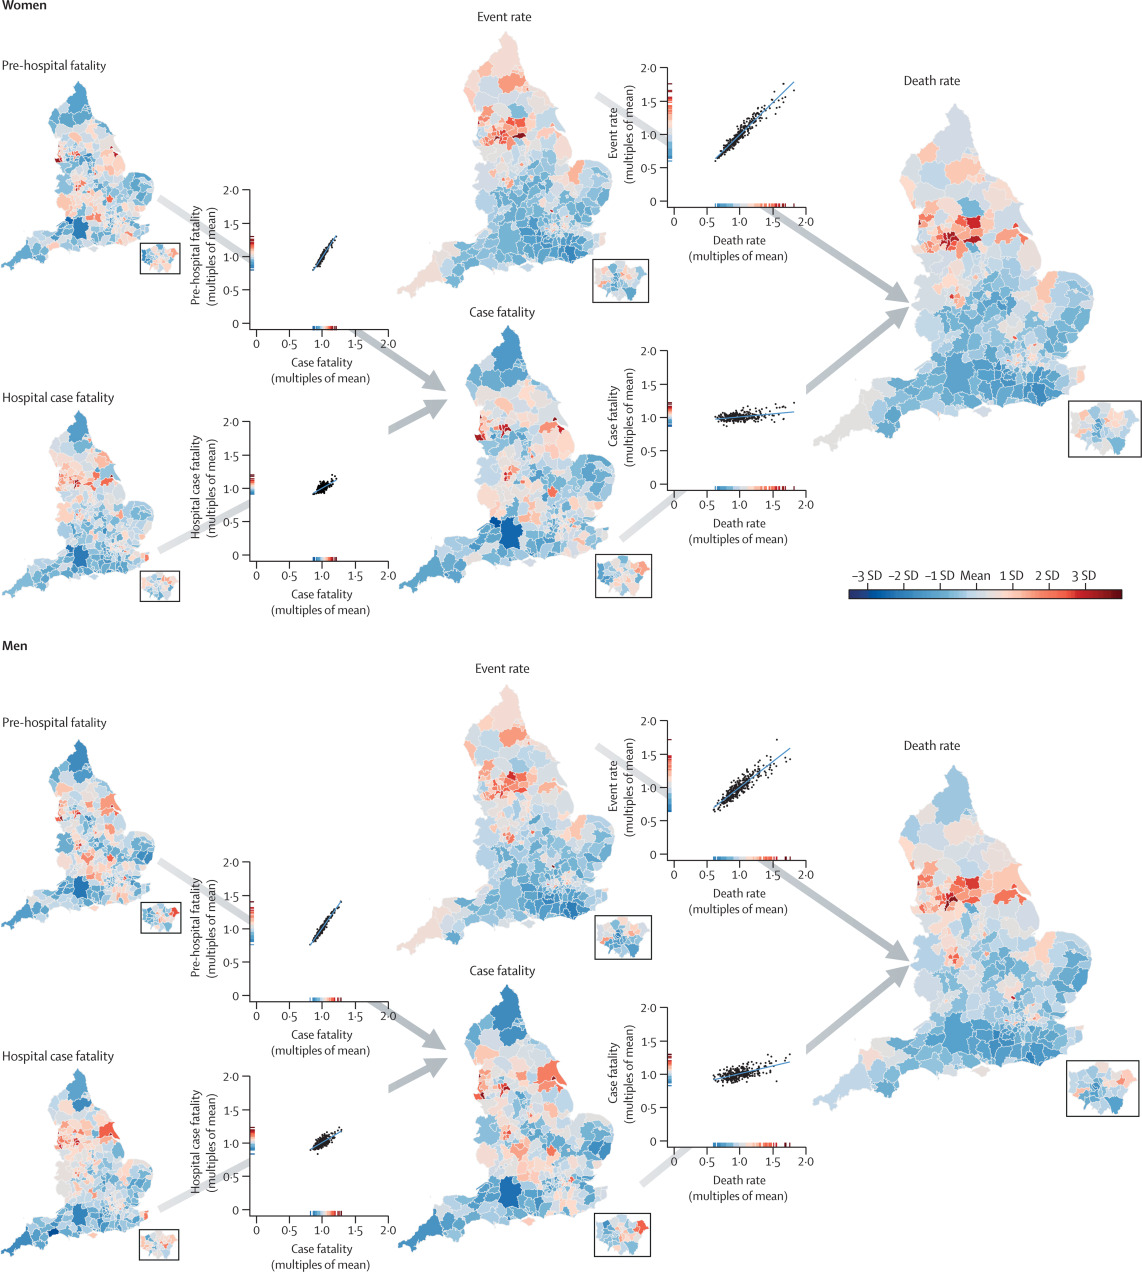 Contributions of event rates, pre-hospital deaths, and deaths following hospitalisation to variations in myocardial infarction mortality in 326 districts in England: a spatial analysis of linked hospitalisation and mortality data